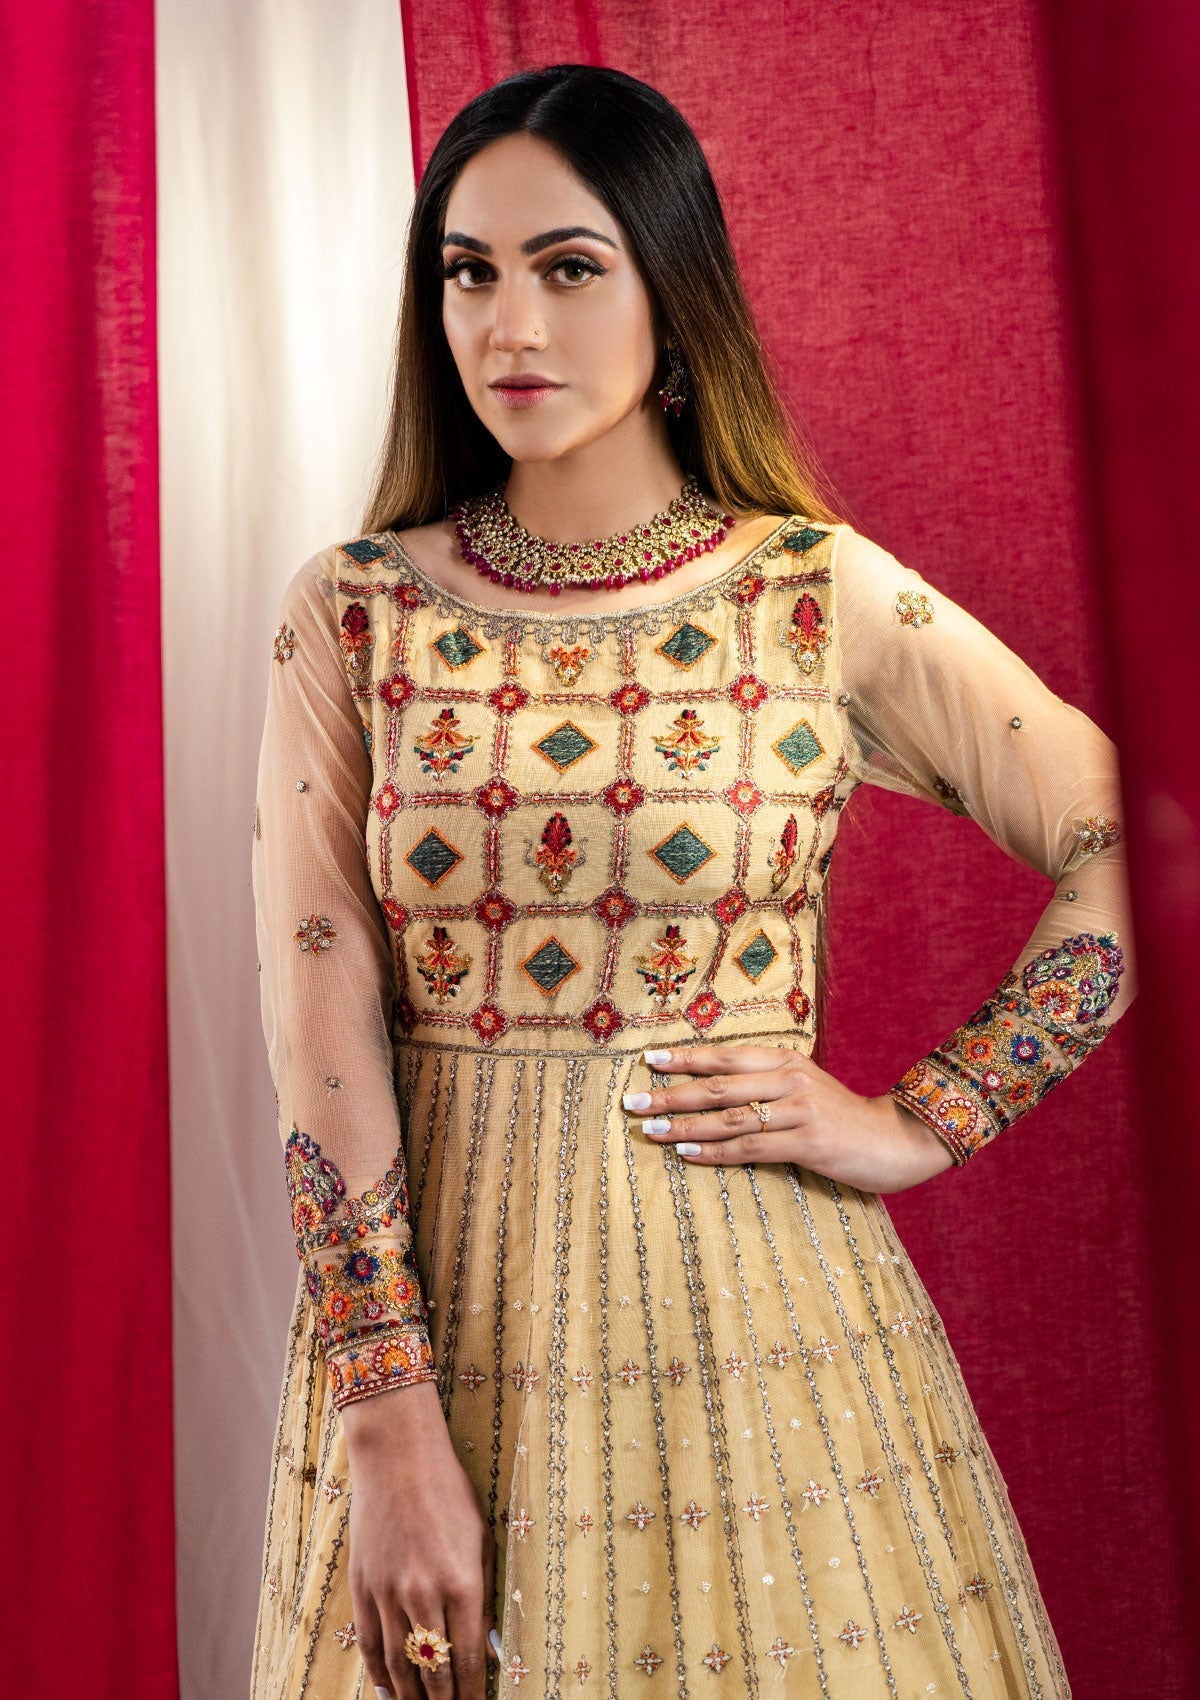 Formal Collection - Rubaaiyat - Embroidered Net - REN#1 available at Saleem Fabrics Traditions